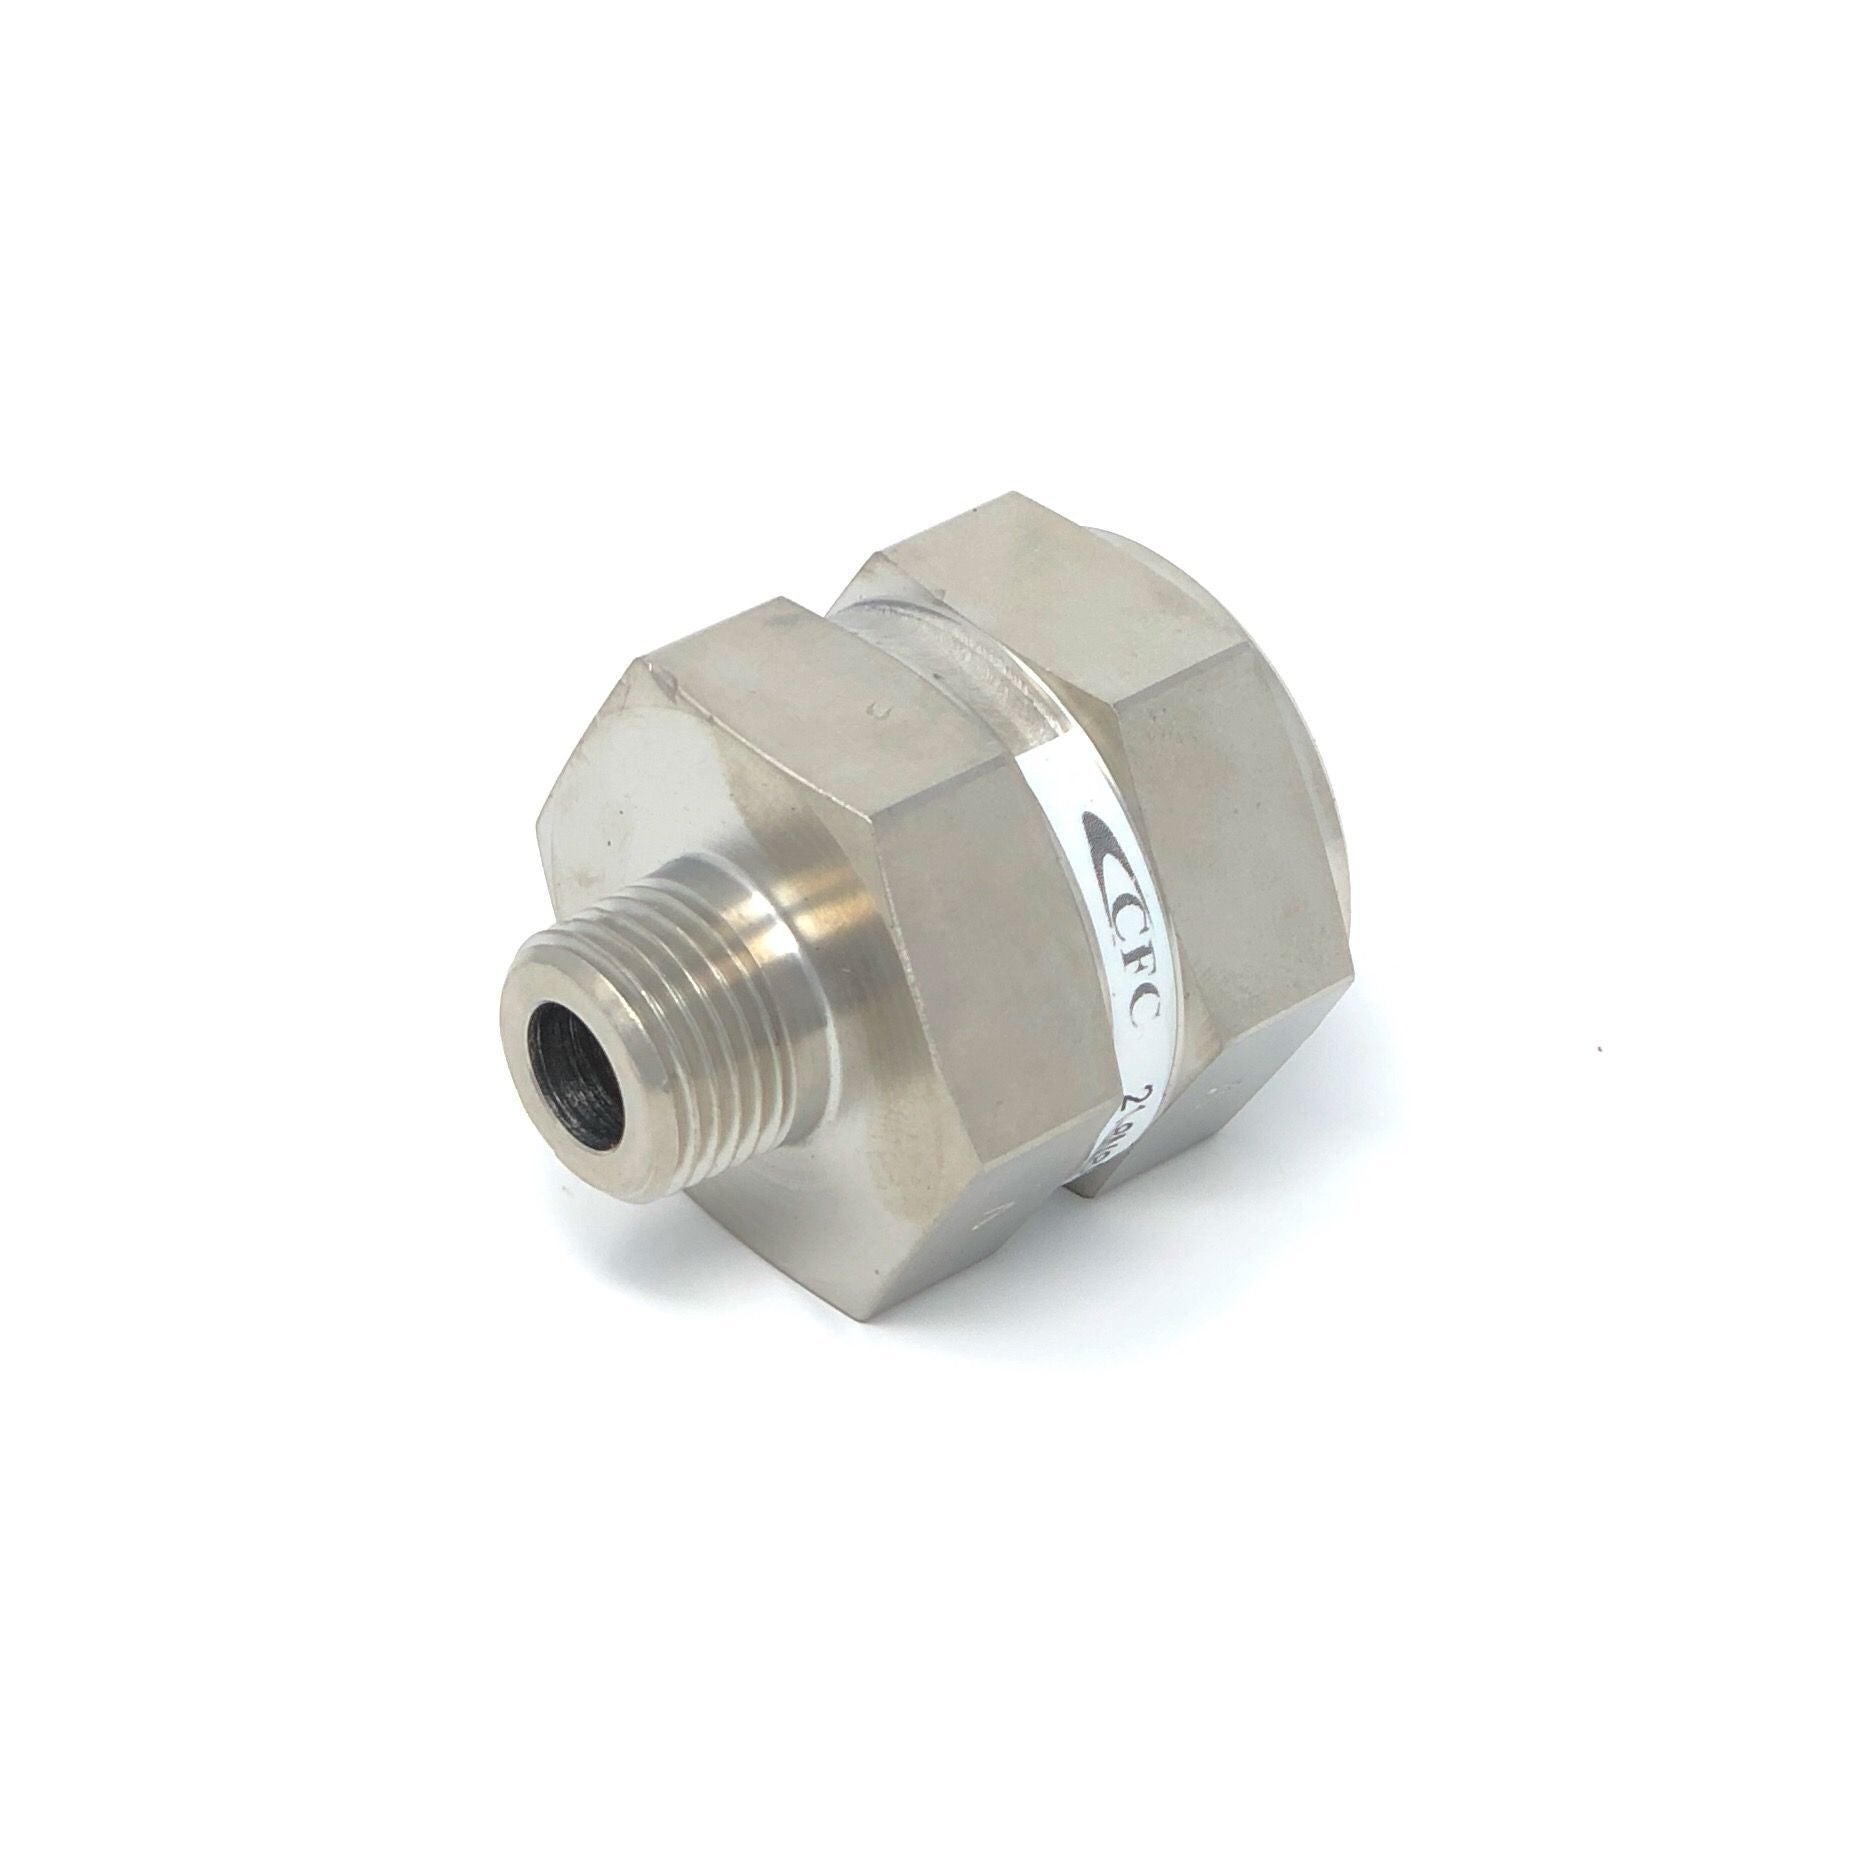 21-4S4S-100S : Chase High Pressure Inline Filter, 6000psi, #4 SAE (1/4"), 100 Micron, No Visual Indicator, No Bypass